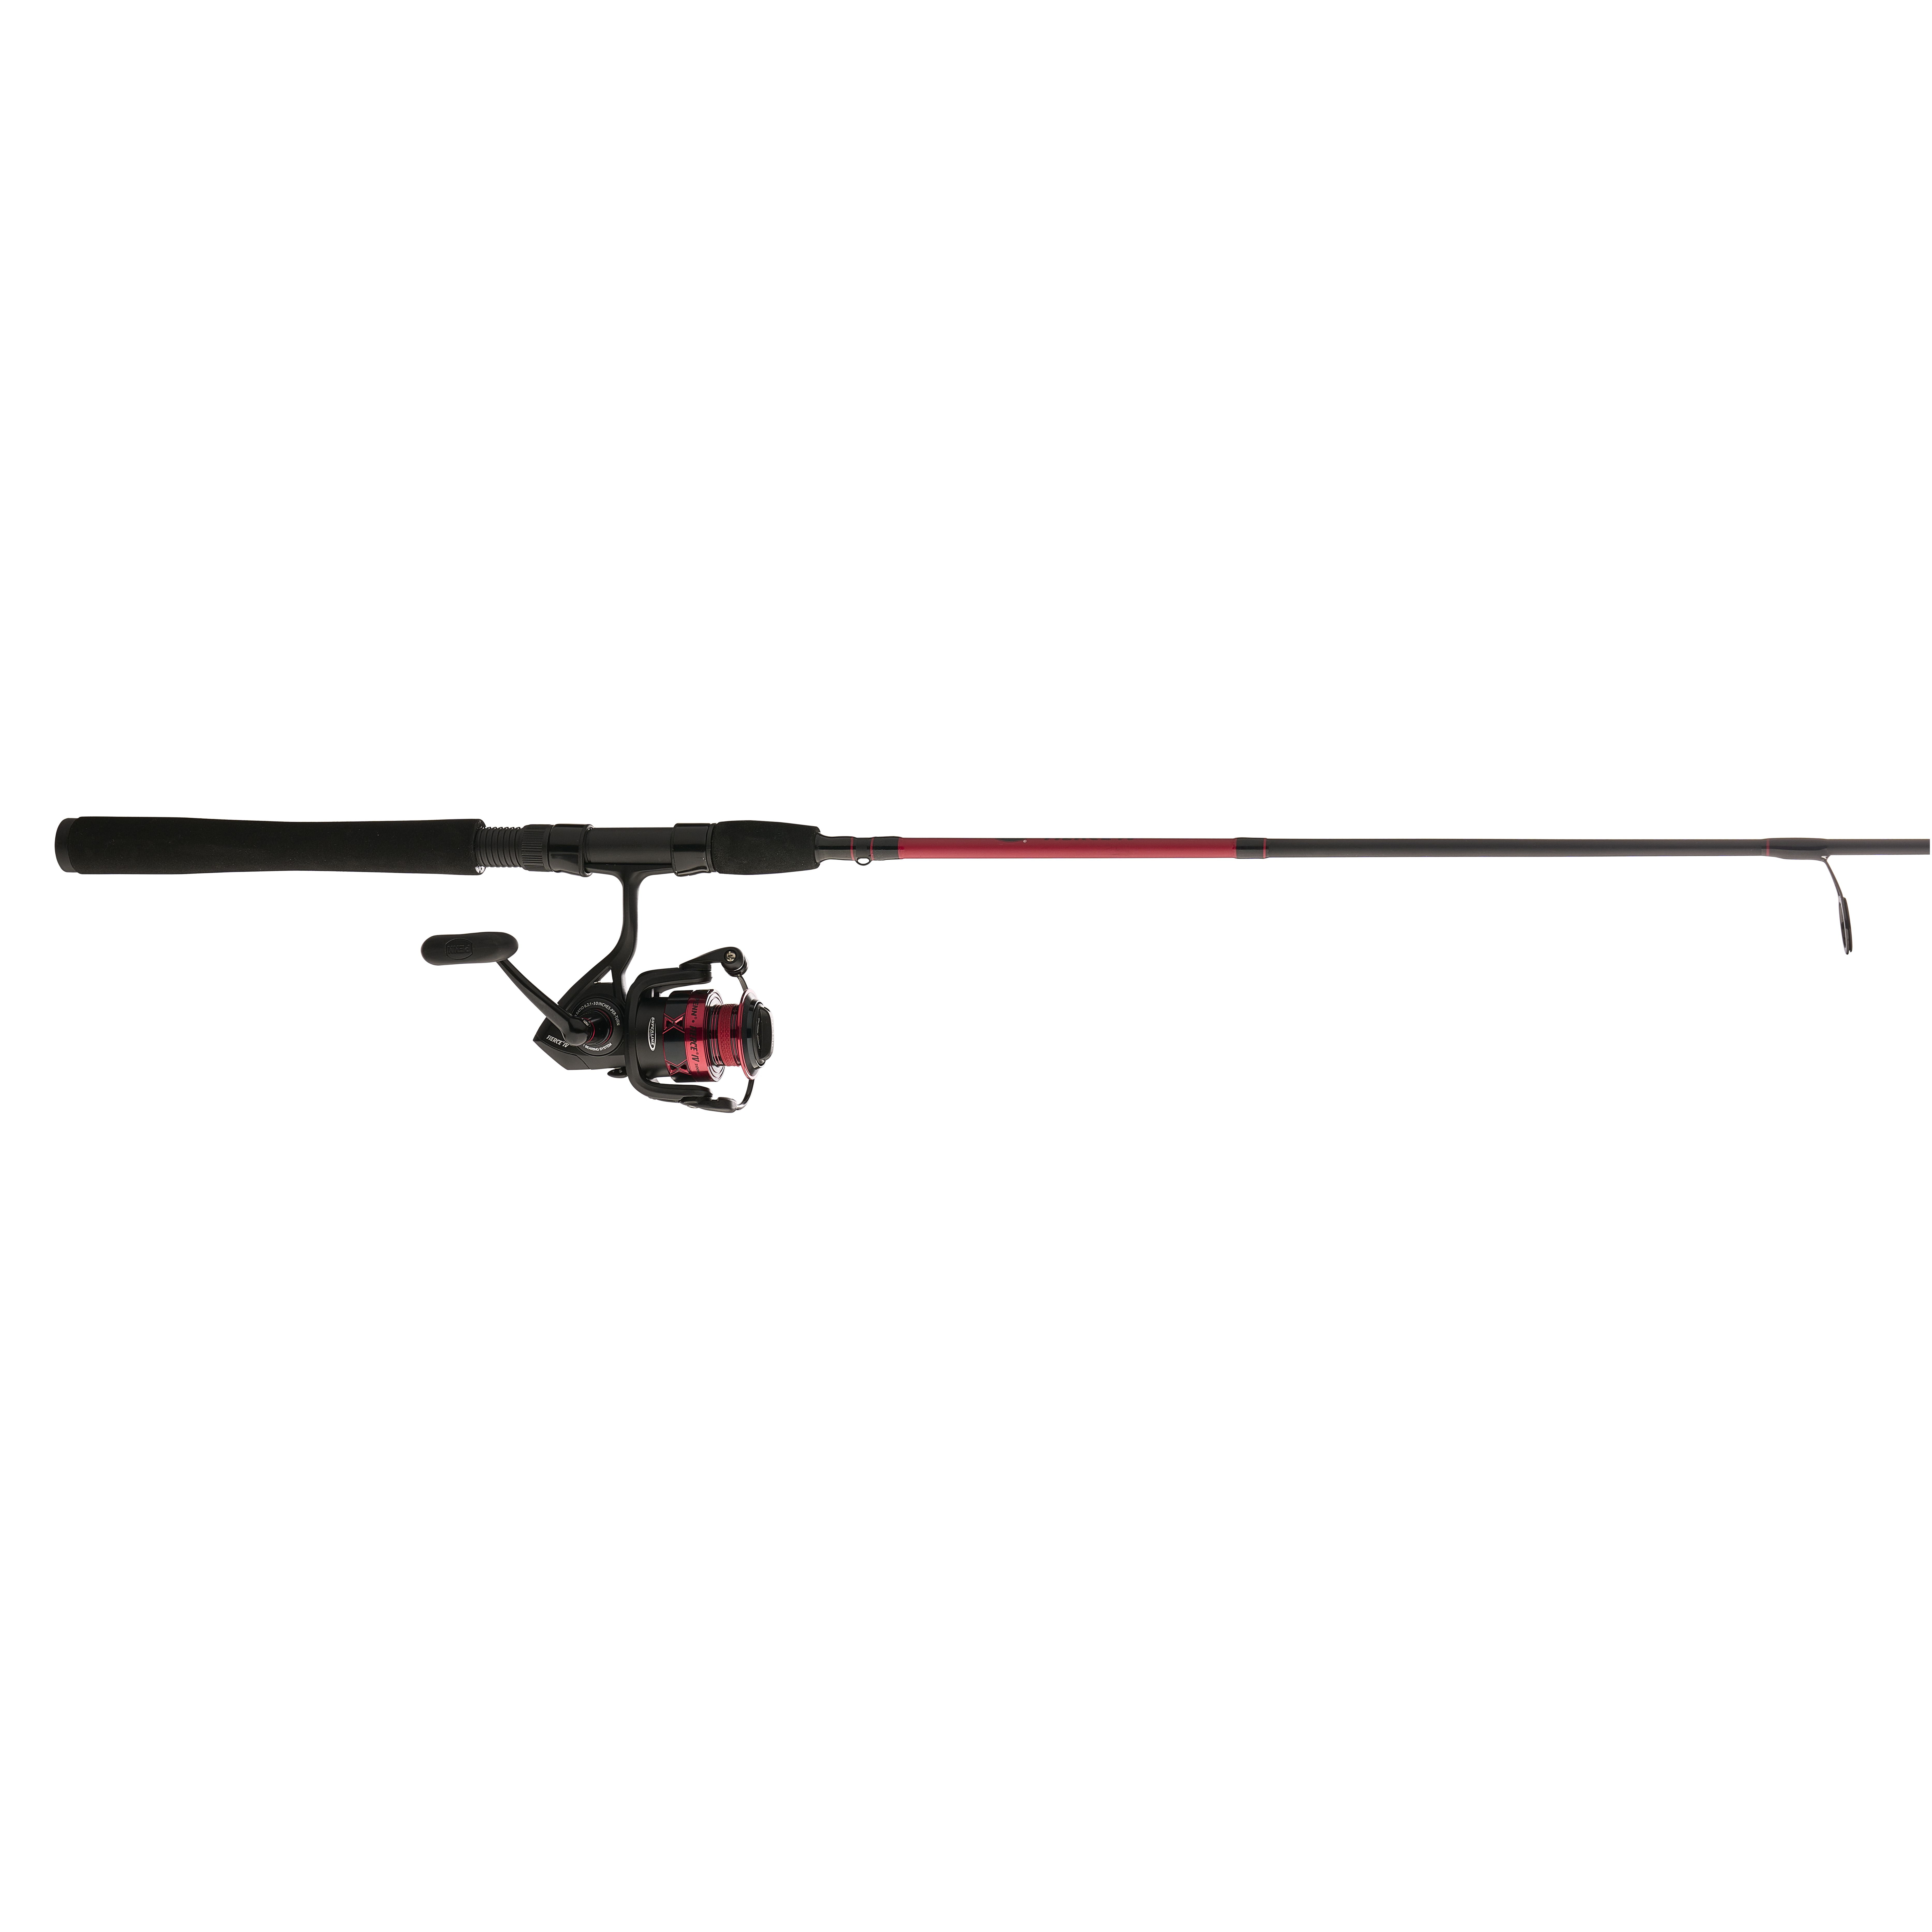 Ardent Super Duty Combo, 7'6 MH Rod, 5000 Spinning 